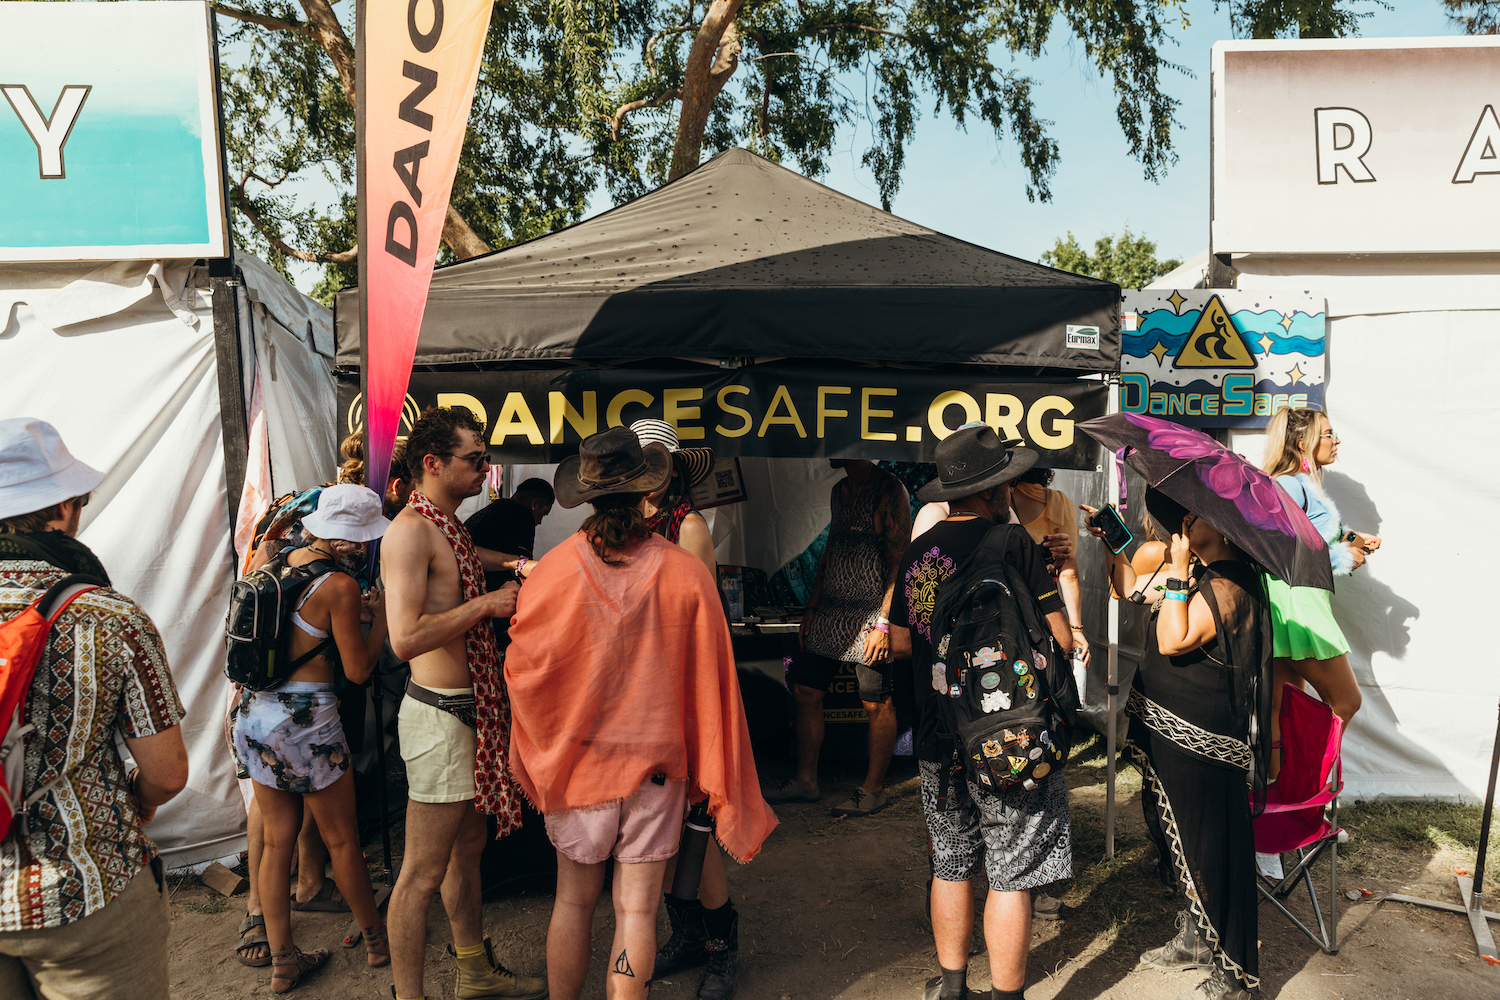 A group of people stand in front of a DanceSafe booth with a black canopy, not looking at the camera. They have all kinds of different appearances. A DanceSafe flag is visible to the left of the booth, a soft pink to peach ombre, and on either side of the booth are two large white structures that have lettering peeking out (but not legible). There's a large tree overhead, a blue sky in the background, and dirt on the ground.